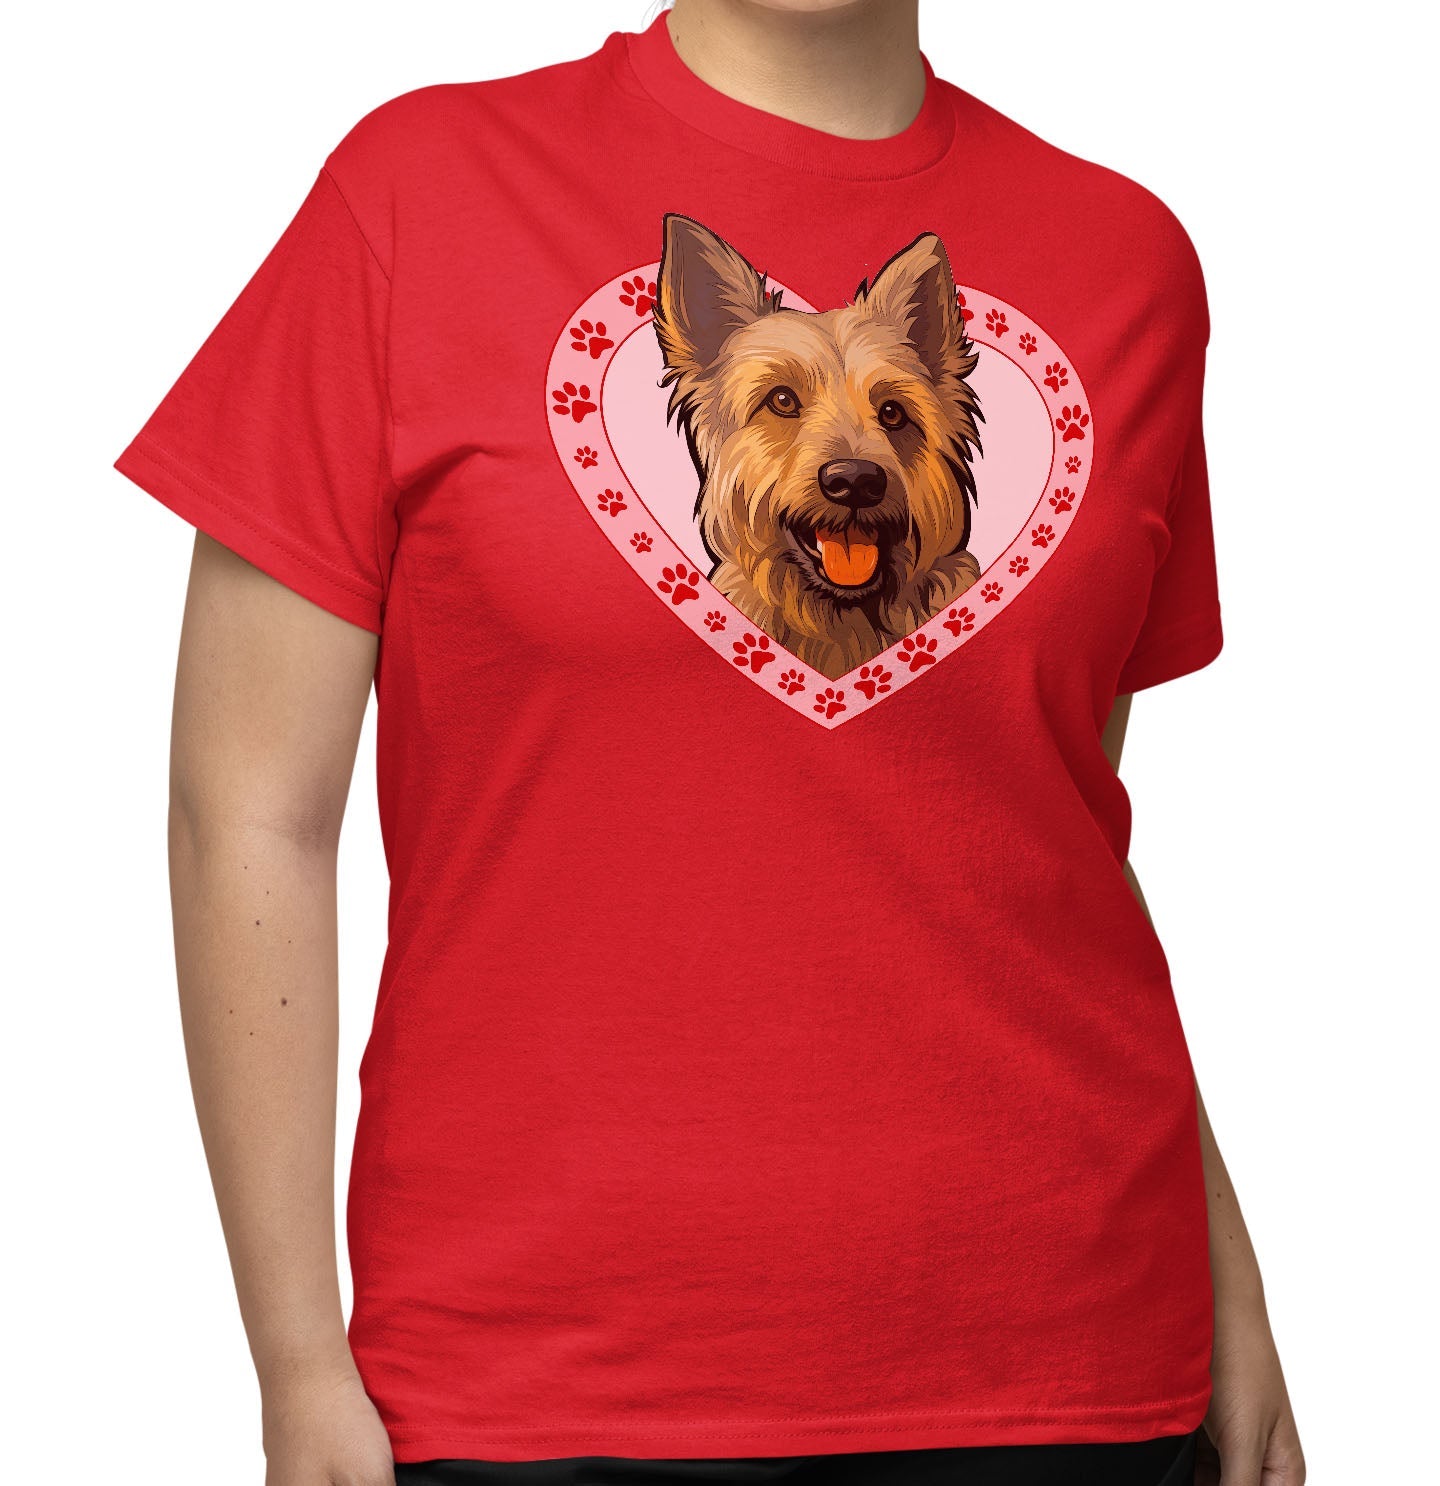 Berger Picard Illustration In Heart - Adult Unisex T-Shirt